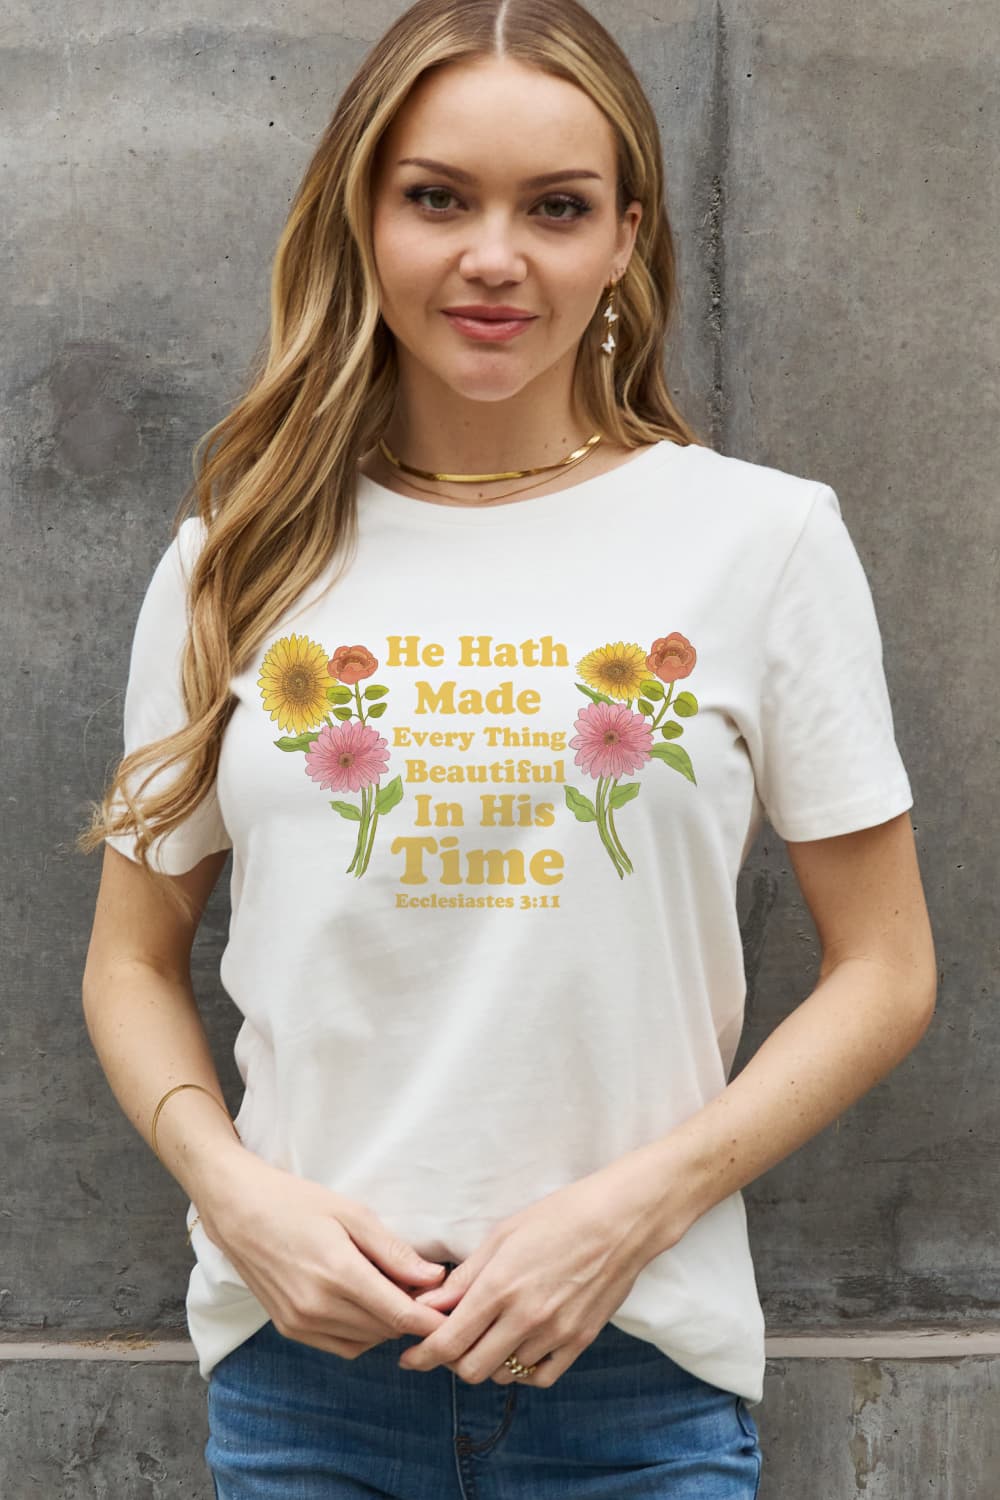 Women's Full Size He Hath Made Everything Beautiful in His Time Ecclesiastes 3:11 Graphic Cotton Tee